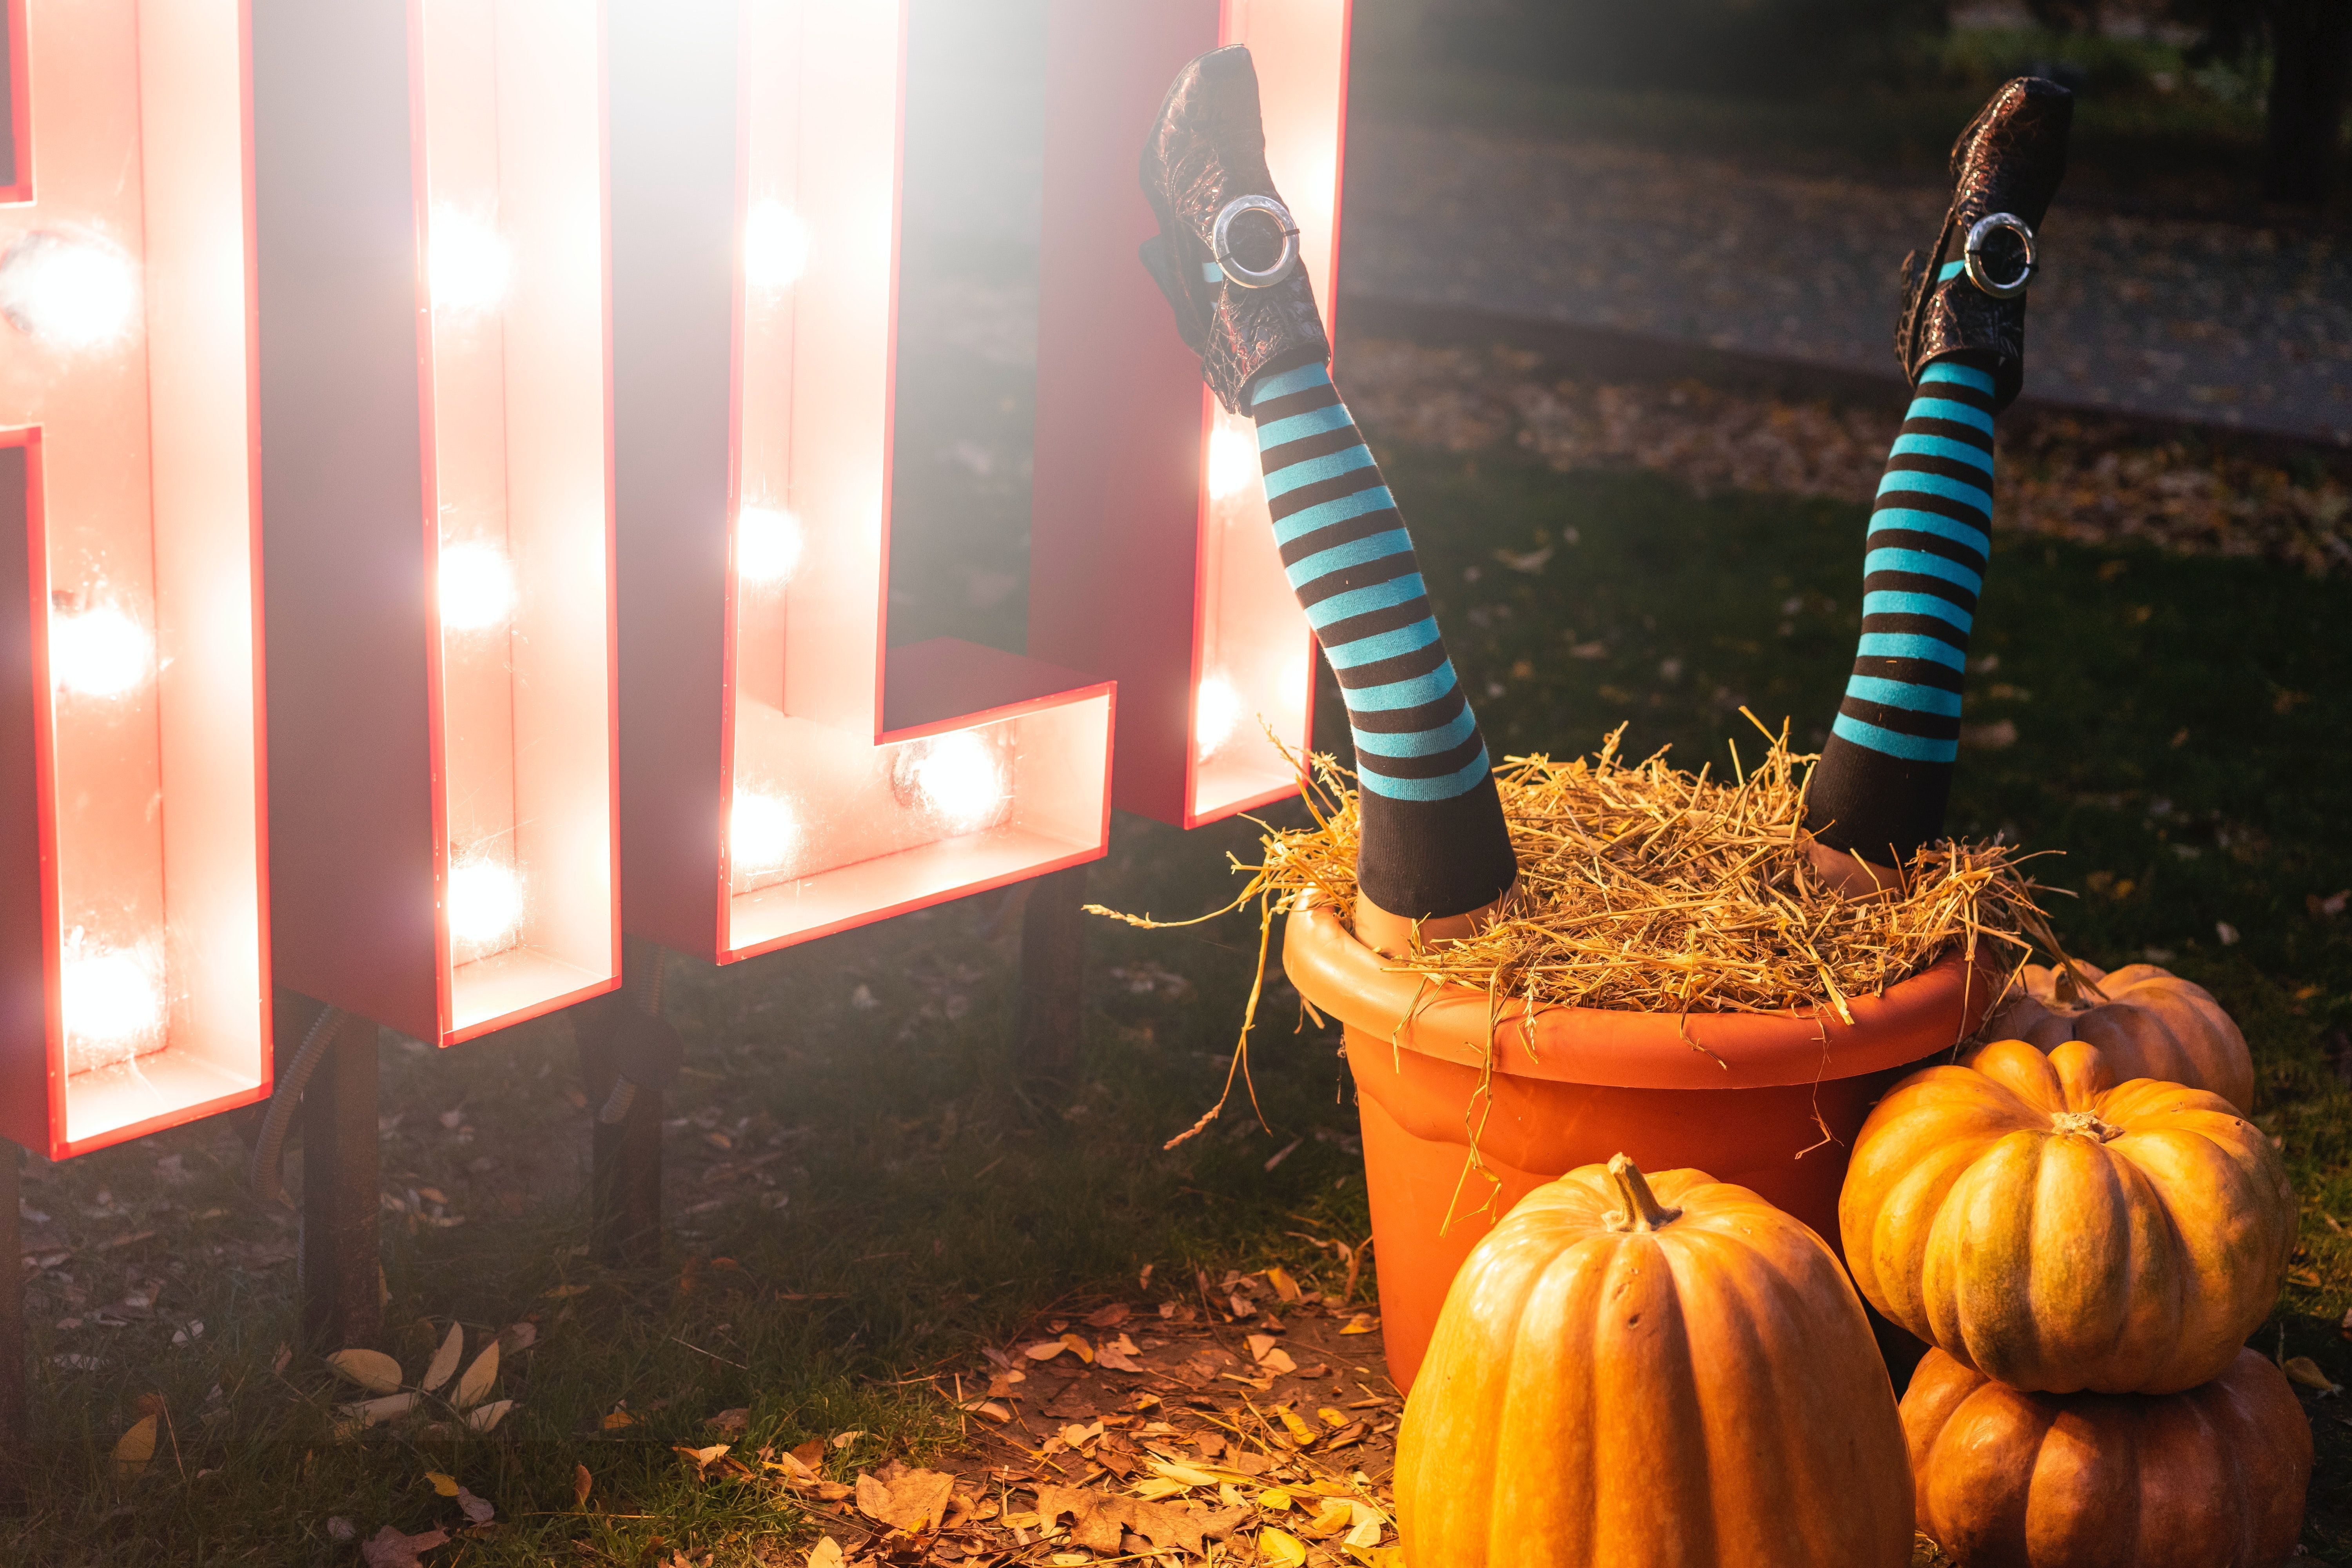 A pair of legs wearing striped socks sticking out of a potted plant next to a lighted sign that says 